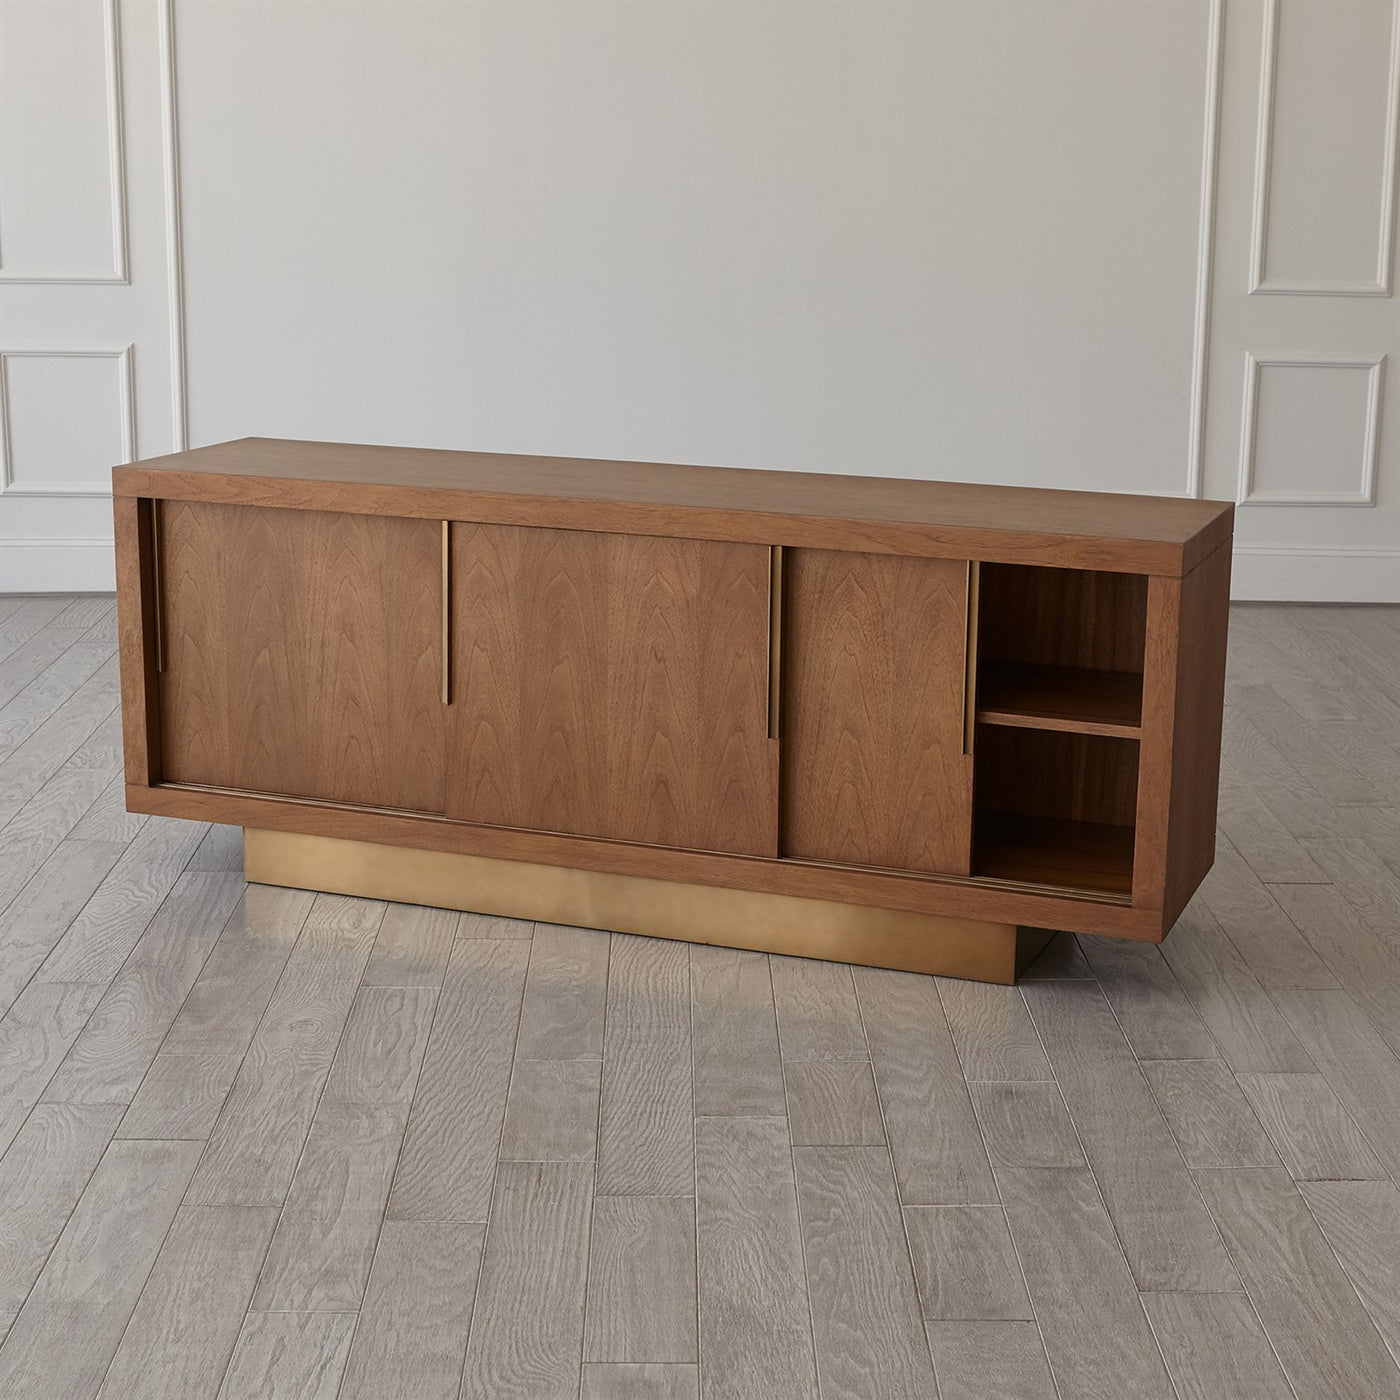 LATITUDES MEDIA CONSOLE by Global Views